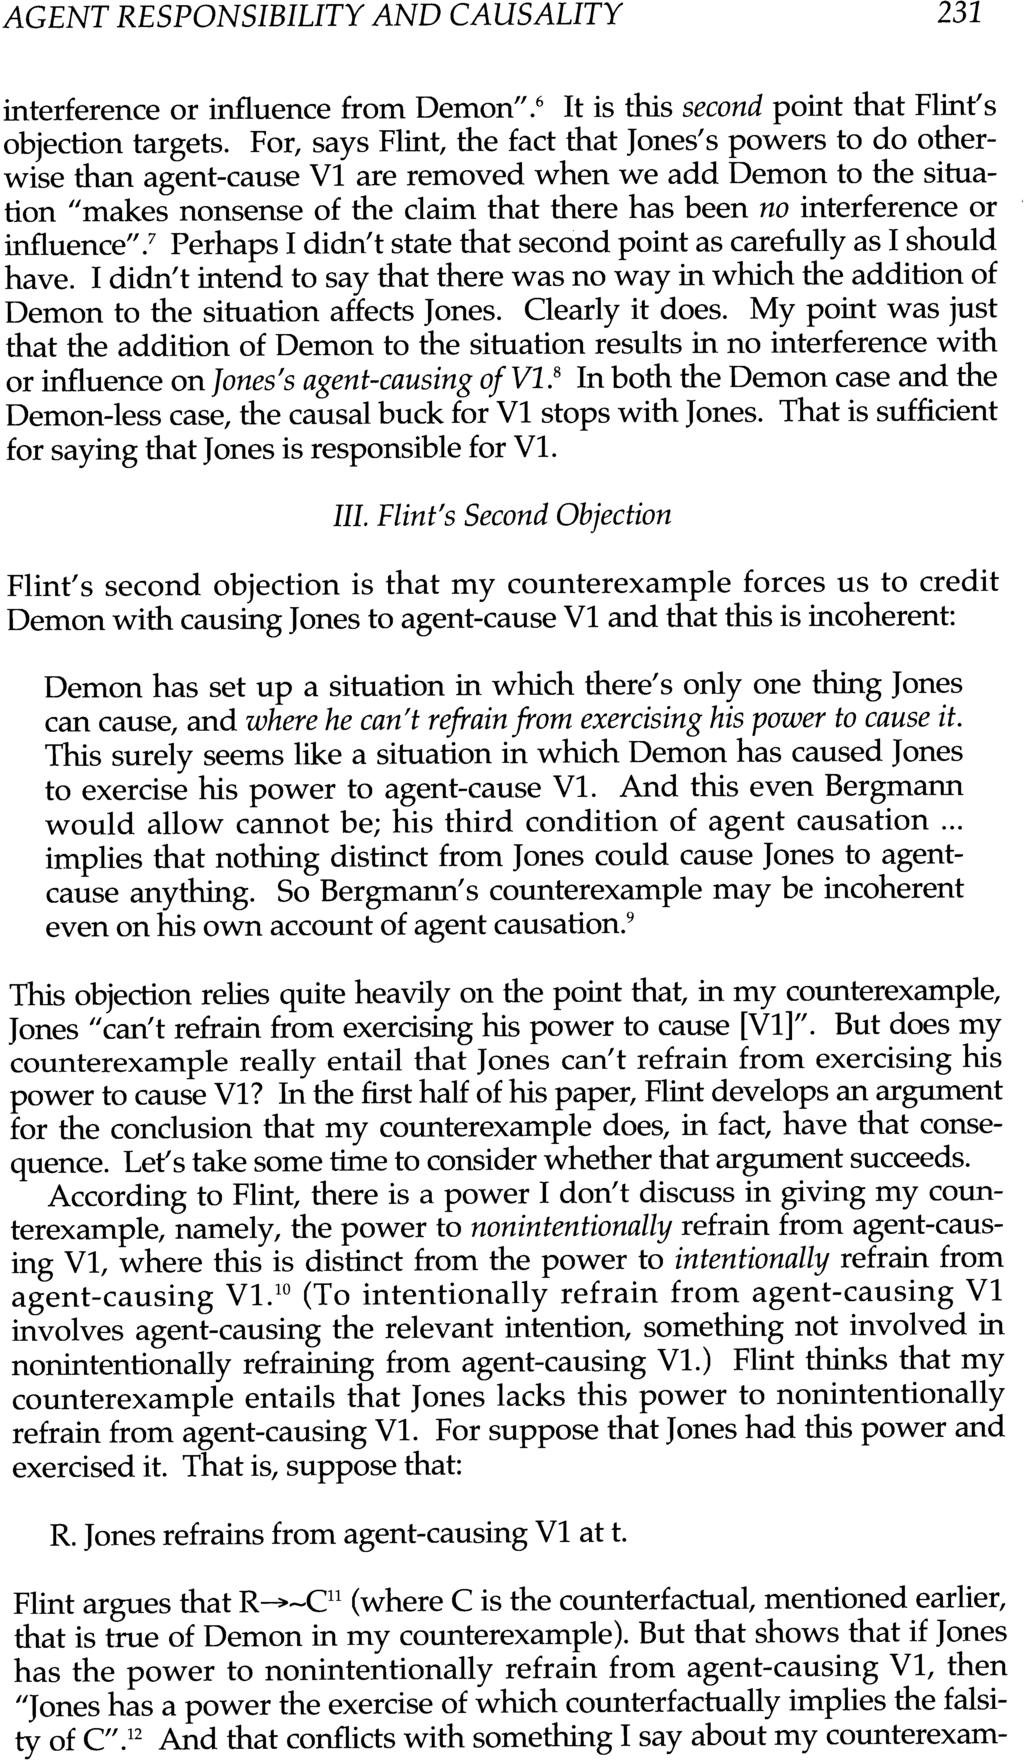 AGENT RESPONSIBILITY AND CAUSALITY 231 interference or influence from Demon".6 It is this second point that Flint's objection targets.